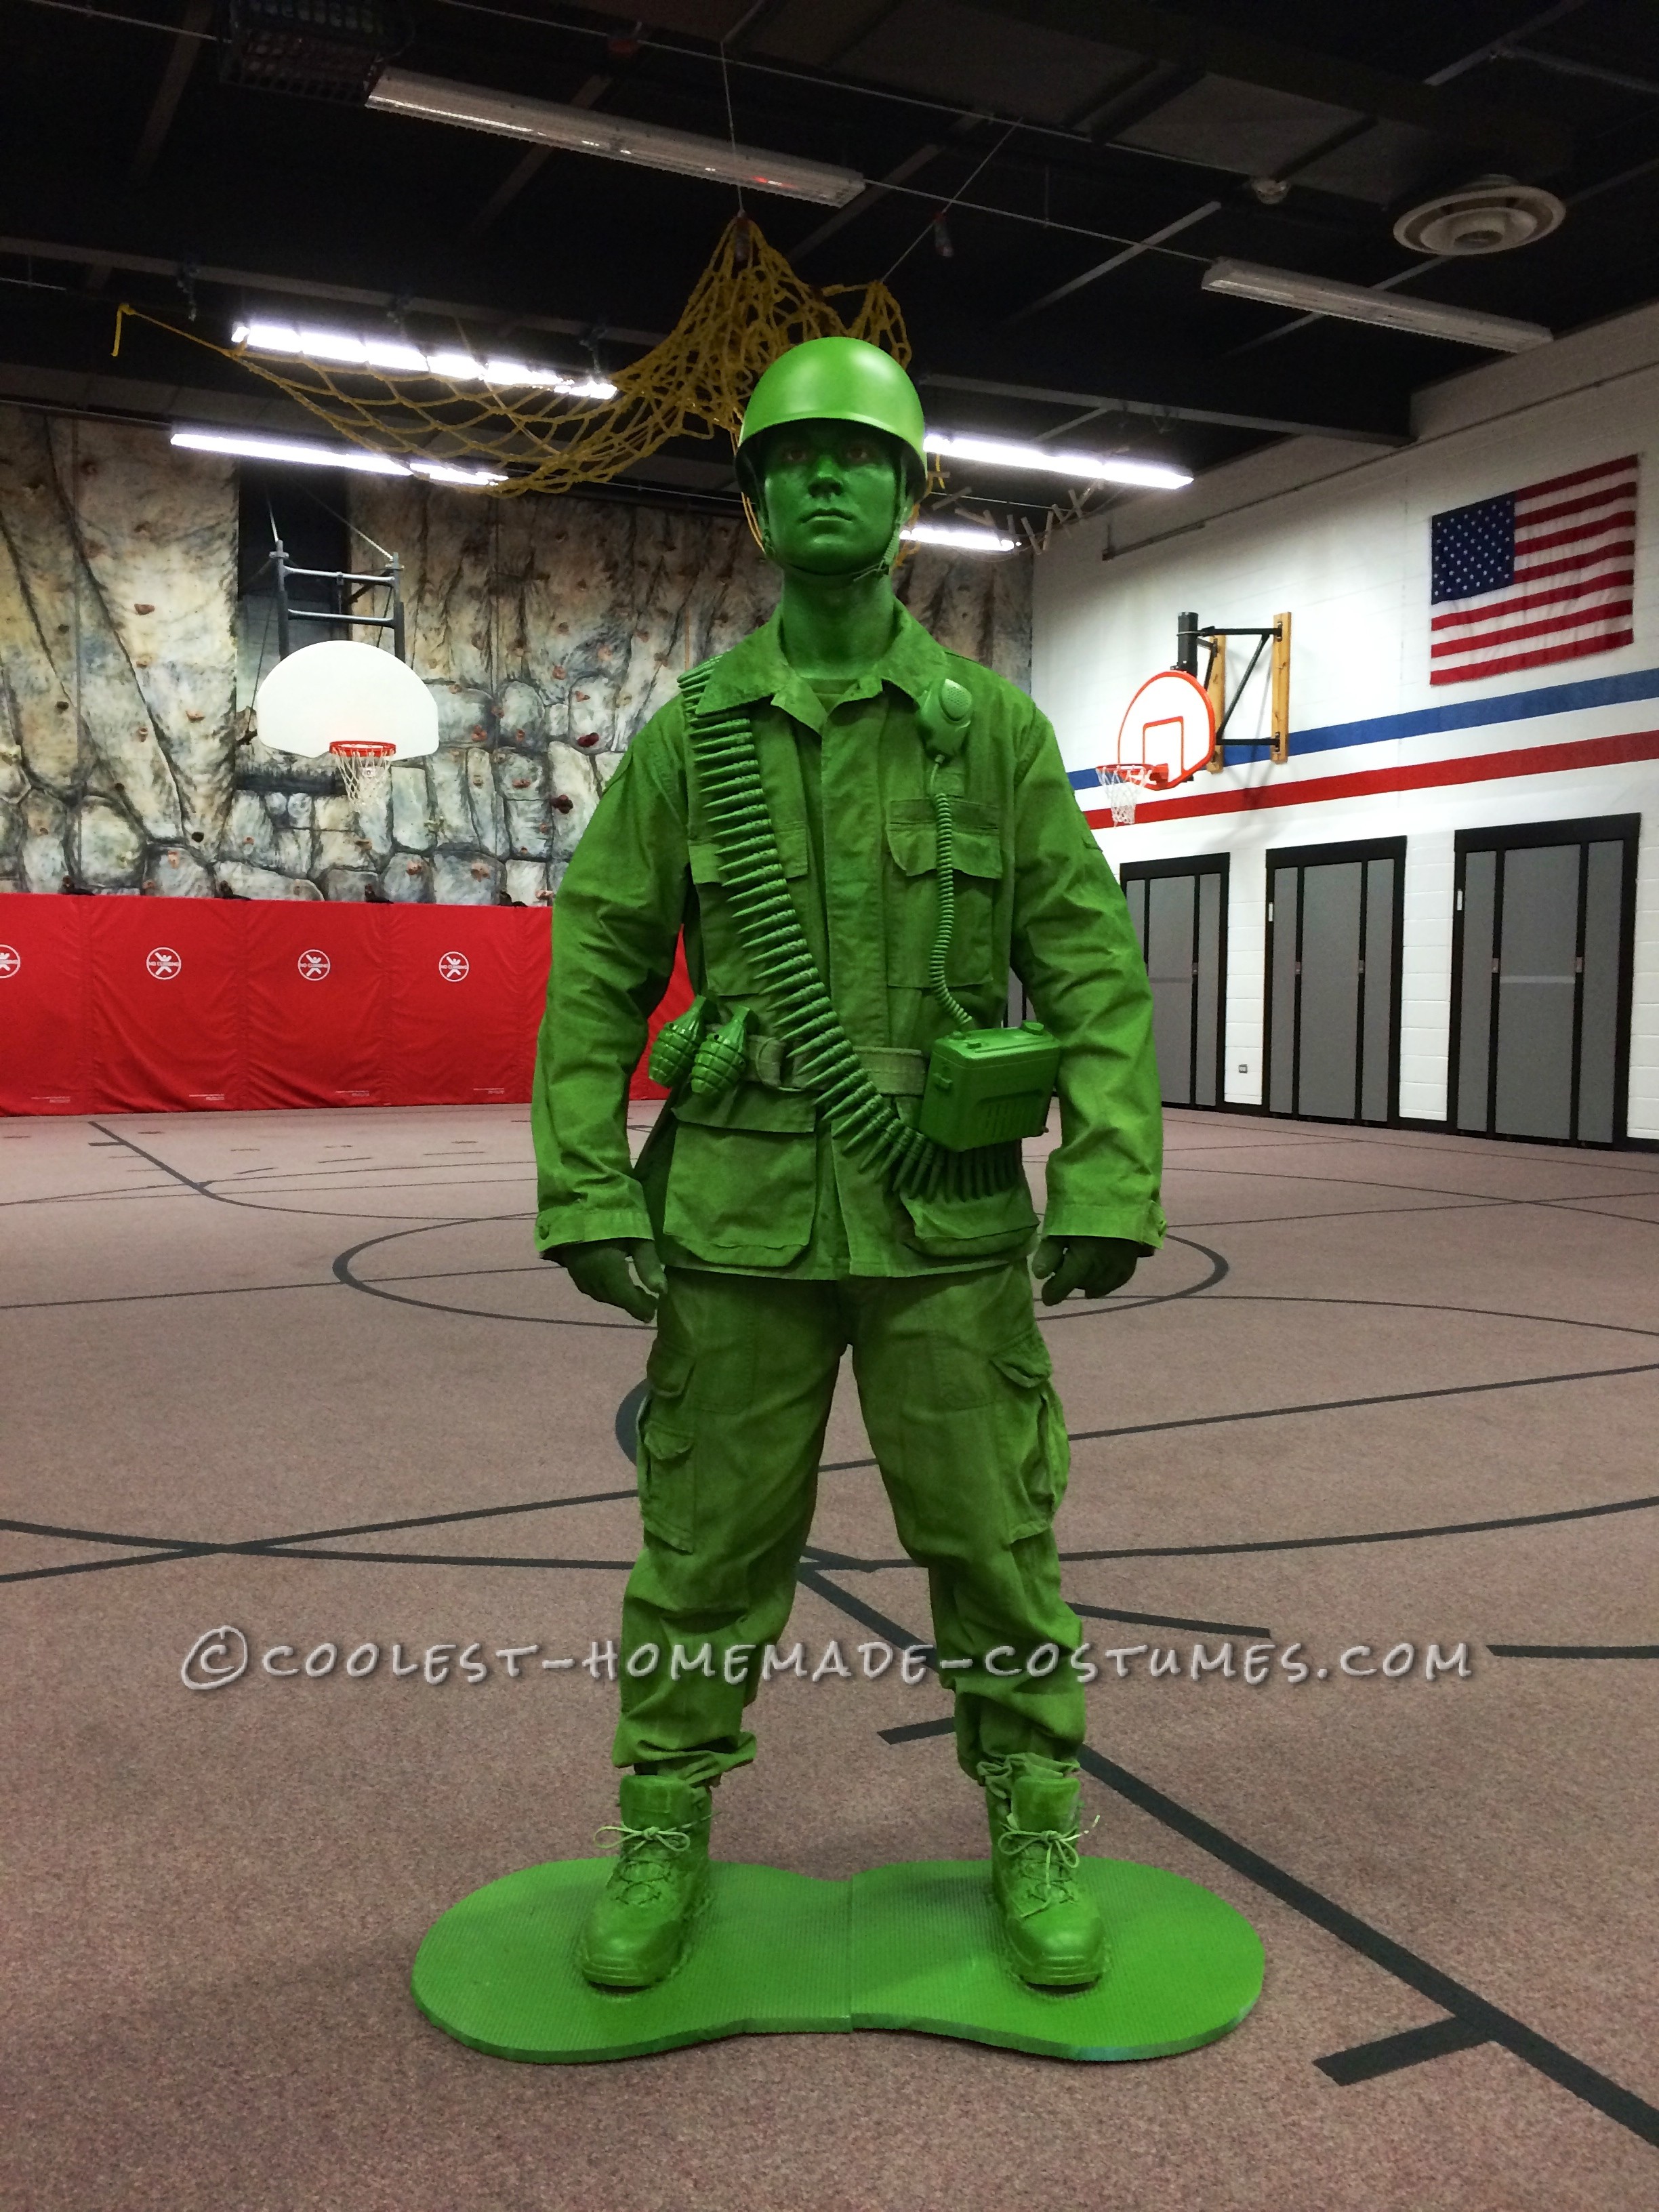 DIY Halloween Costume Idea: A Plastic Toy Soldier Comes to Life!